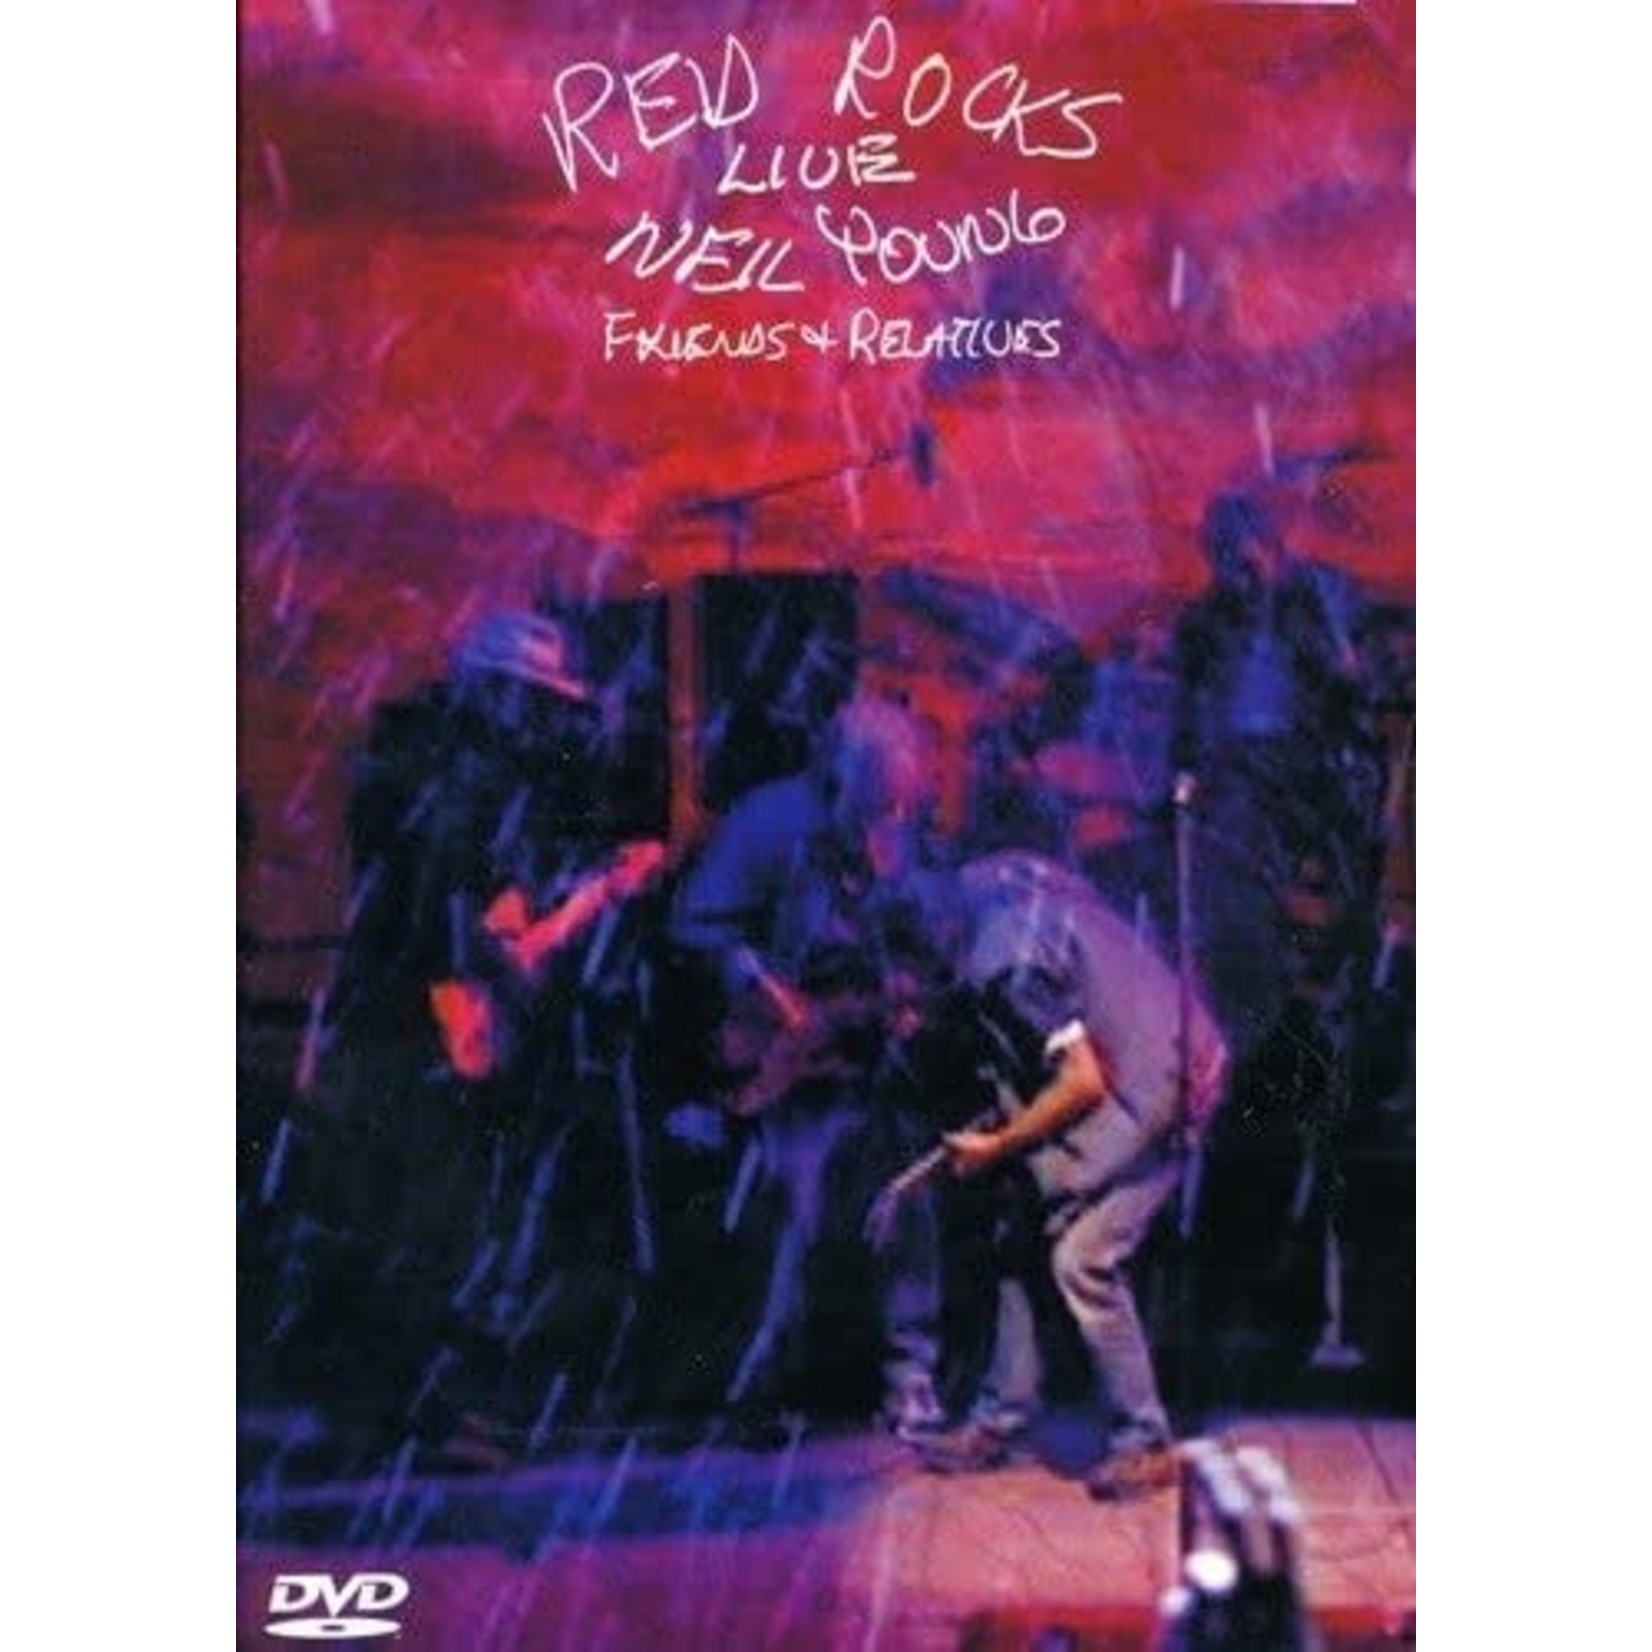 Neil Young - Friends & Relatives: Red Rocks Live [USED DVD]